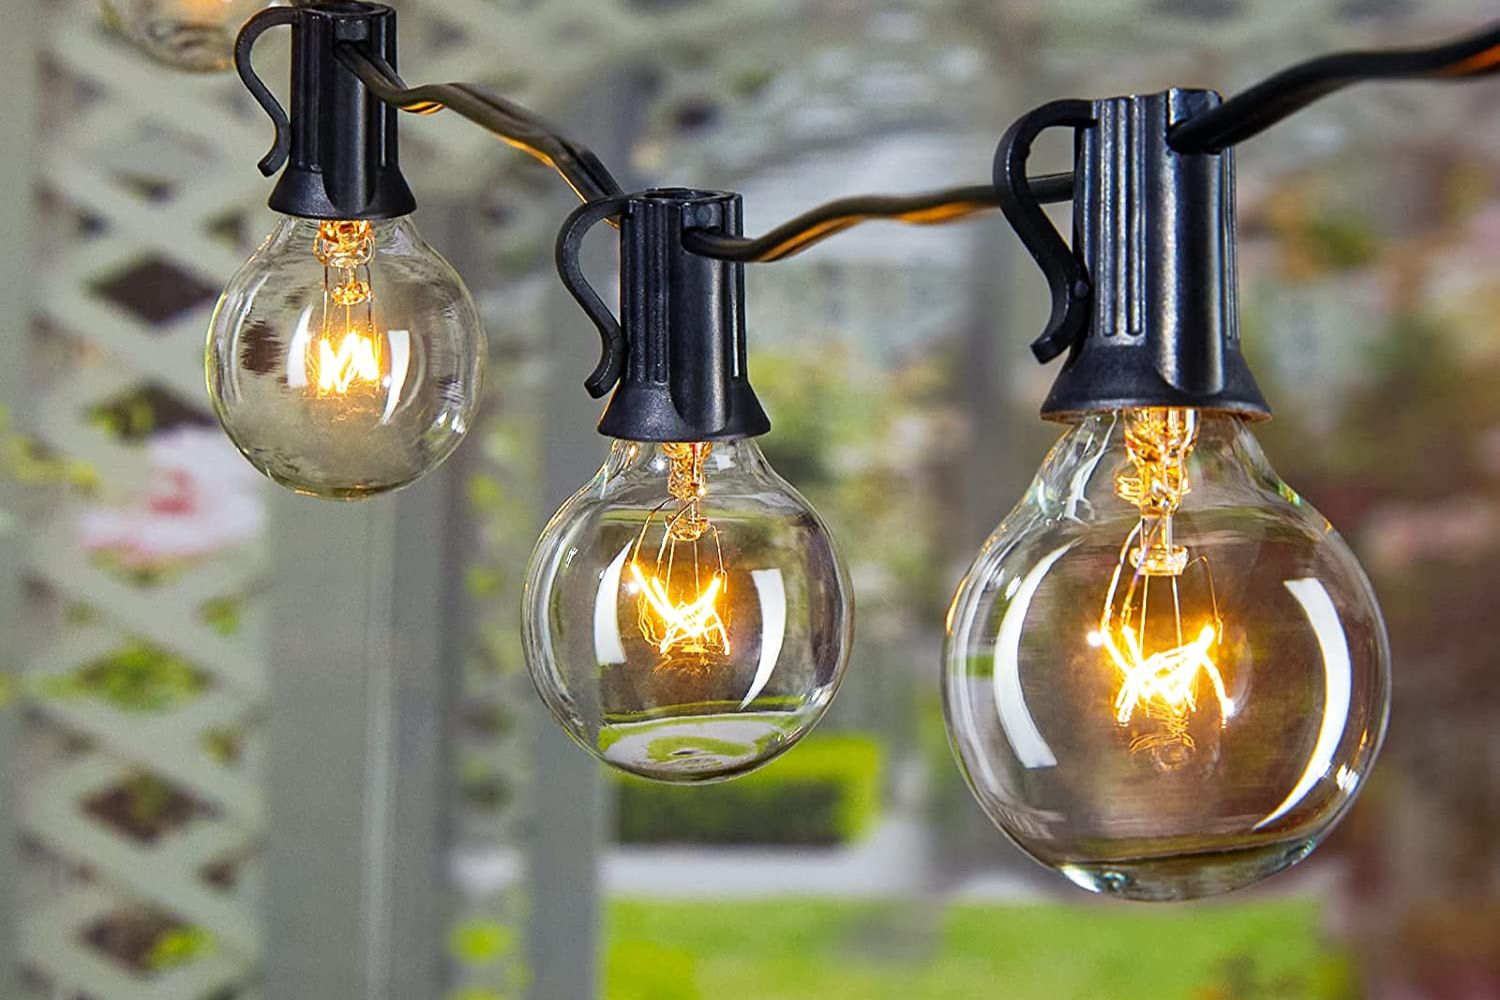 Everything You Need for a Backyard Cookout Options: Brightown Outdoor String Lights